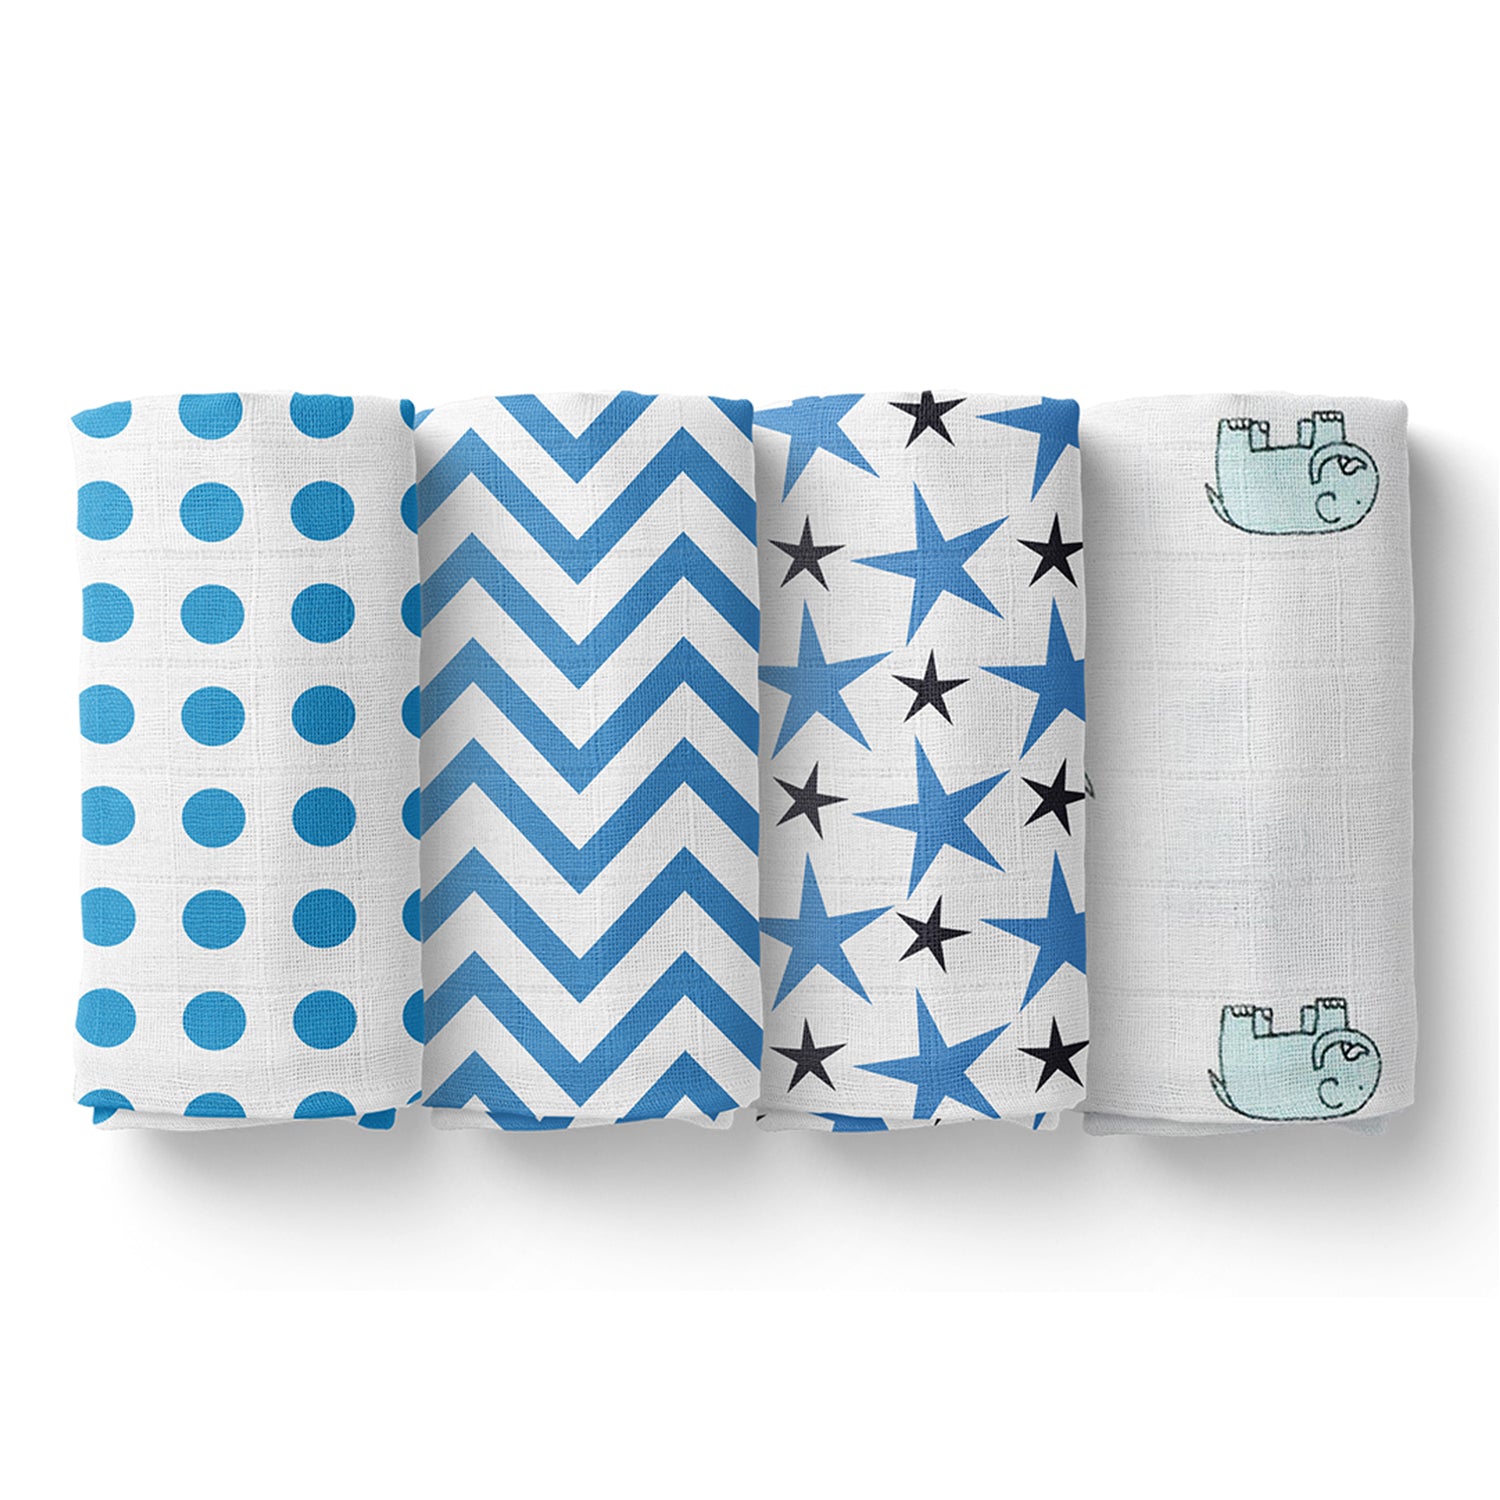 Baby Muslin Cloth Swaddle -0-12 Months-Pack of 4 -Blue Dot, Zigzag, Star, Elephant